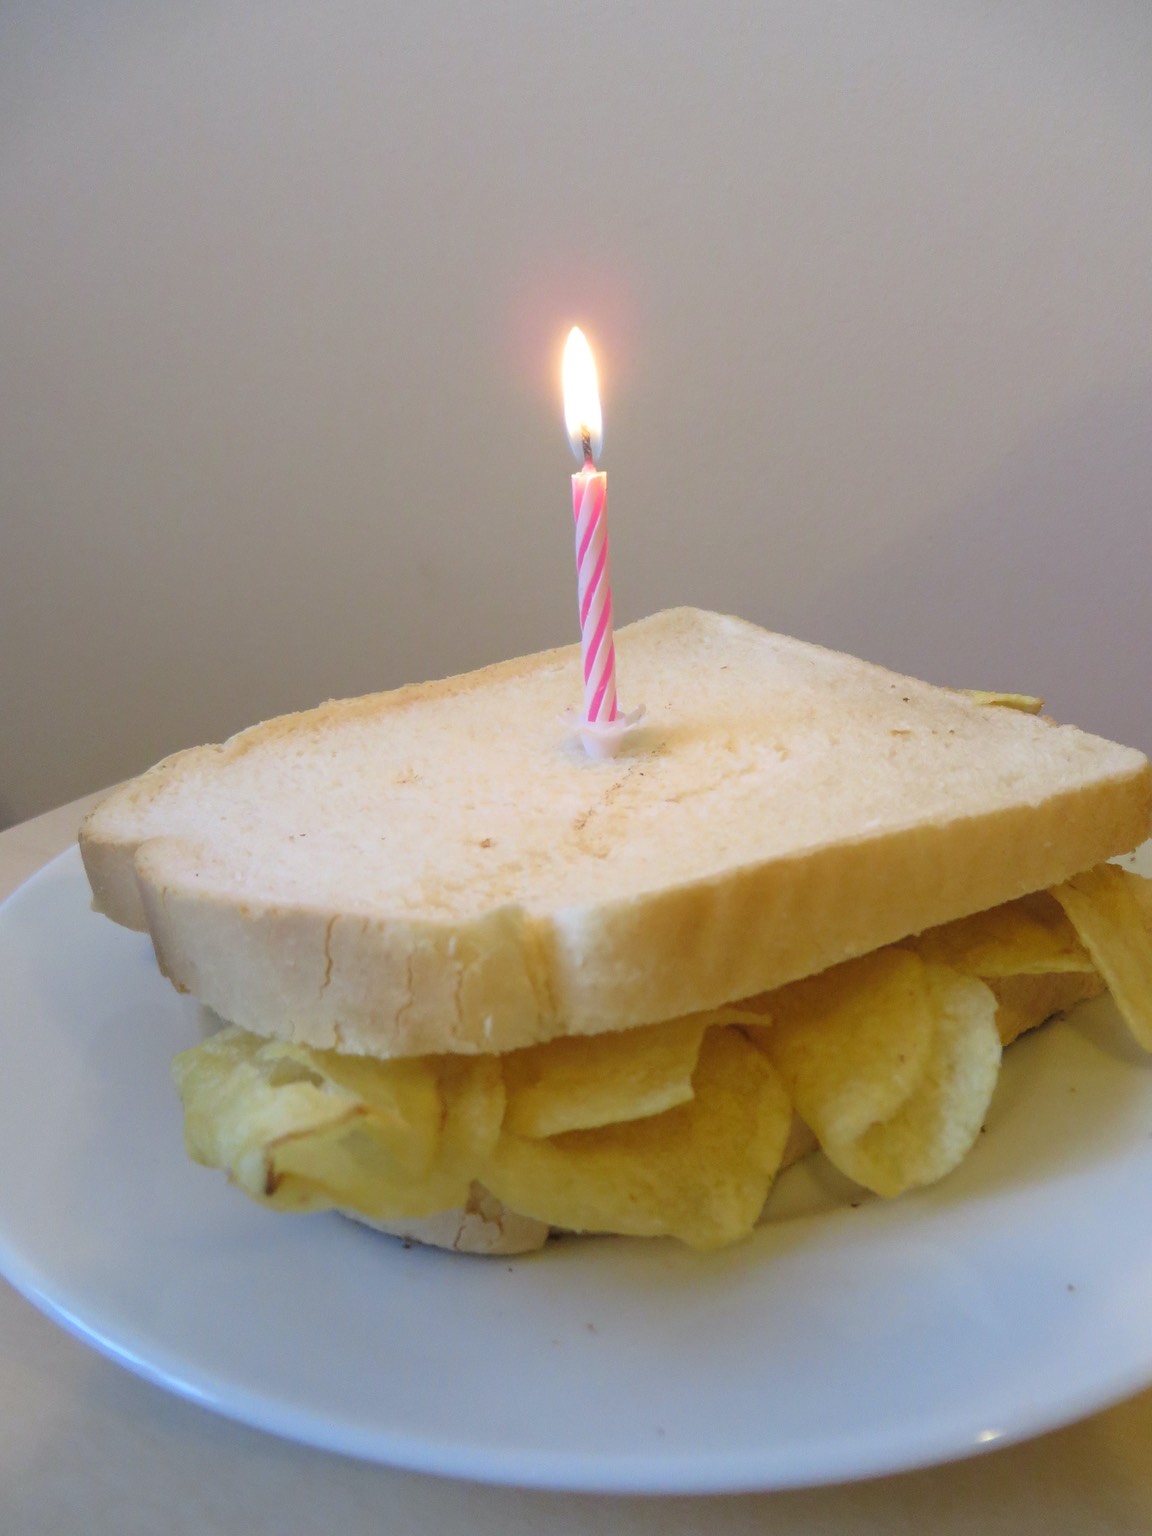 A birthday candle on a white crisp sandwich